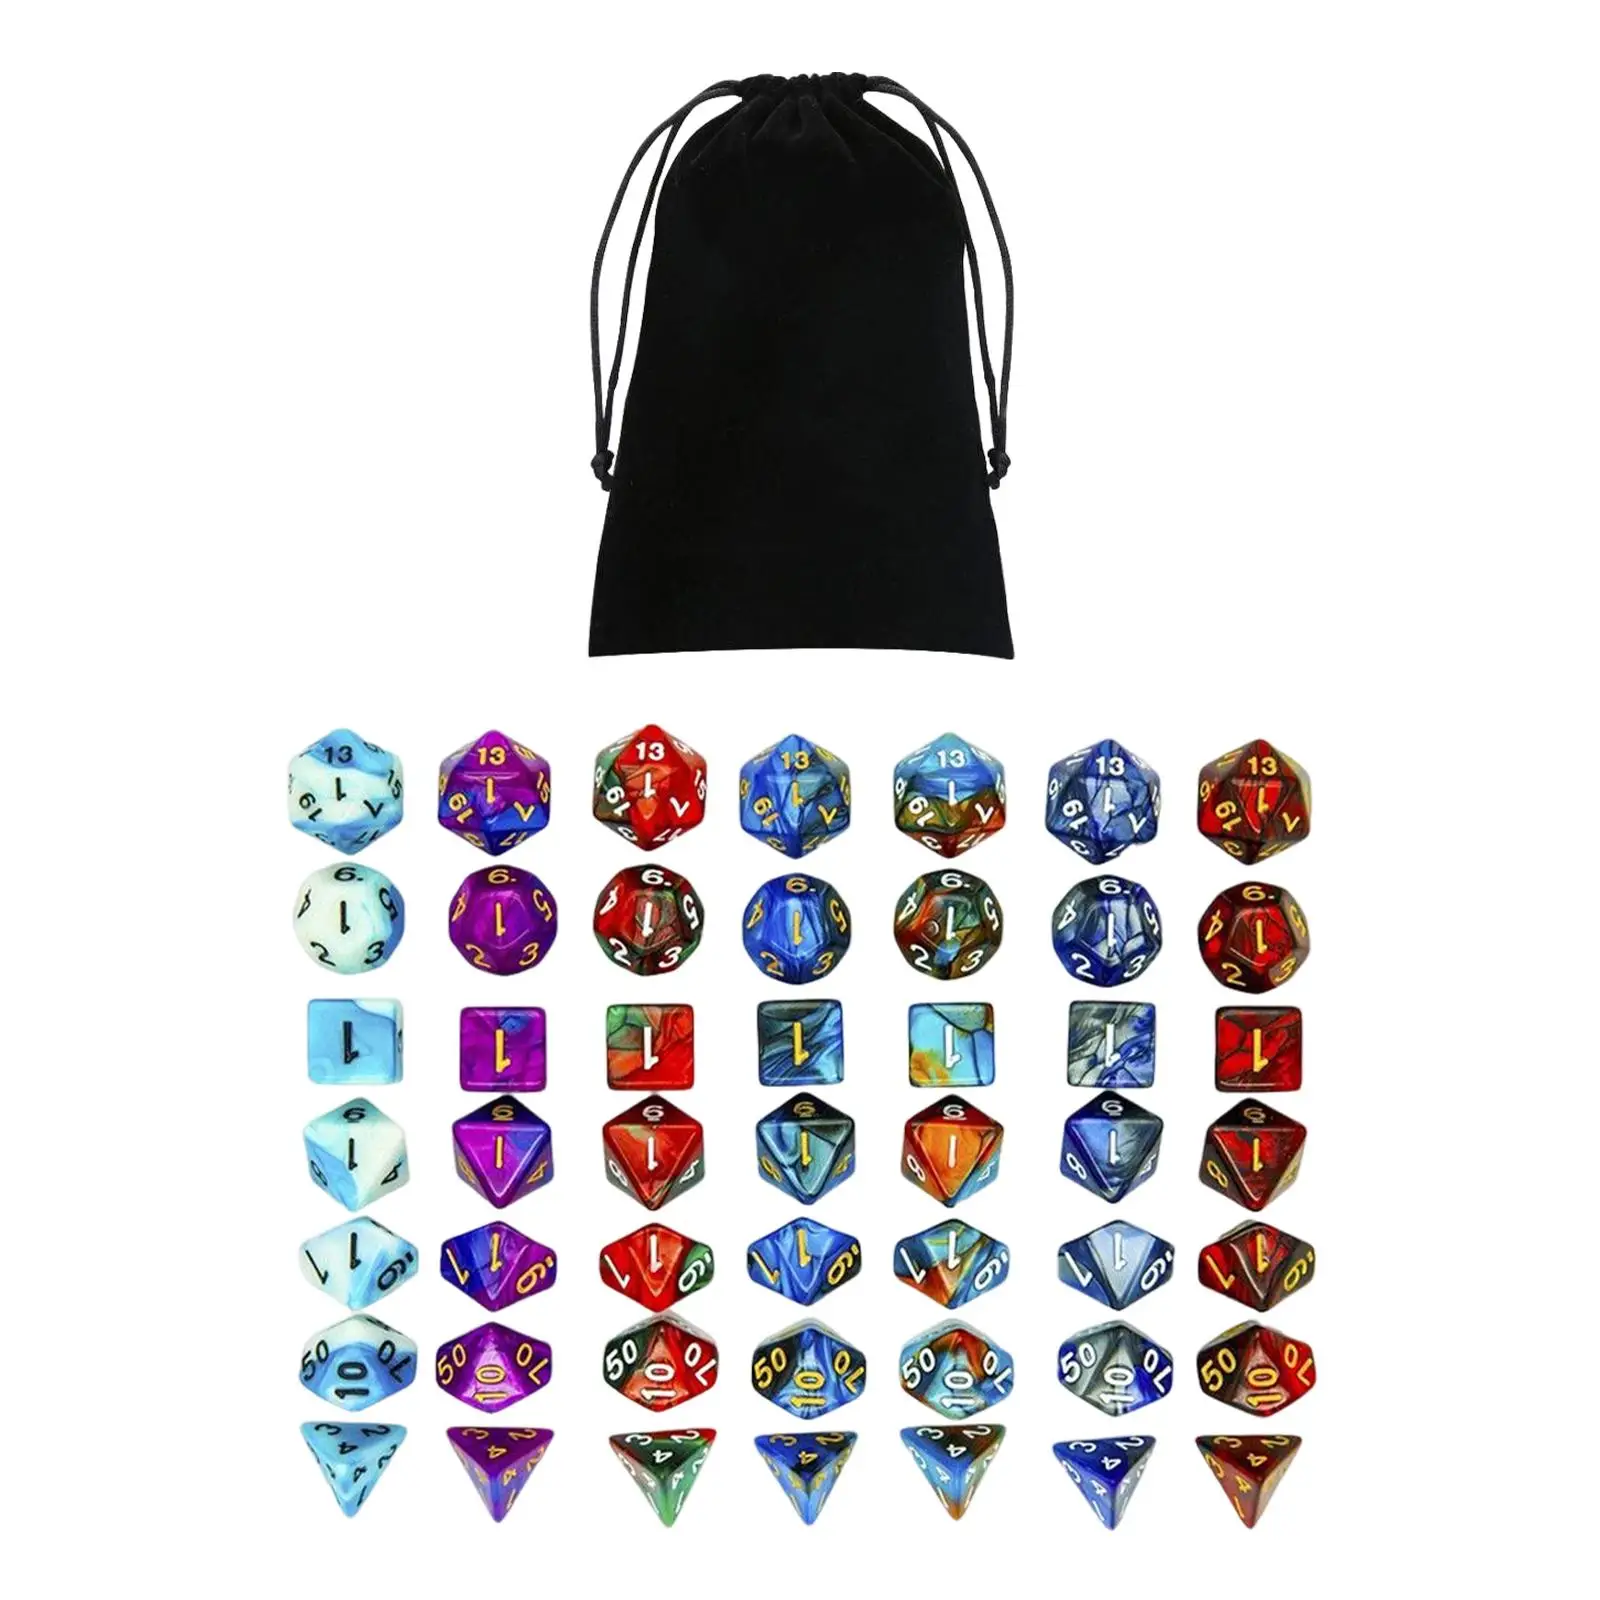 49 Polyhedral Dices Set Toys,D4-D20 with Pouch for MTG Role Playing RPG Board